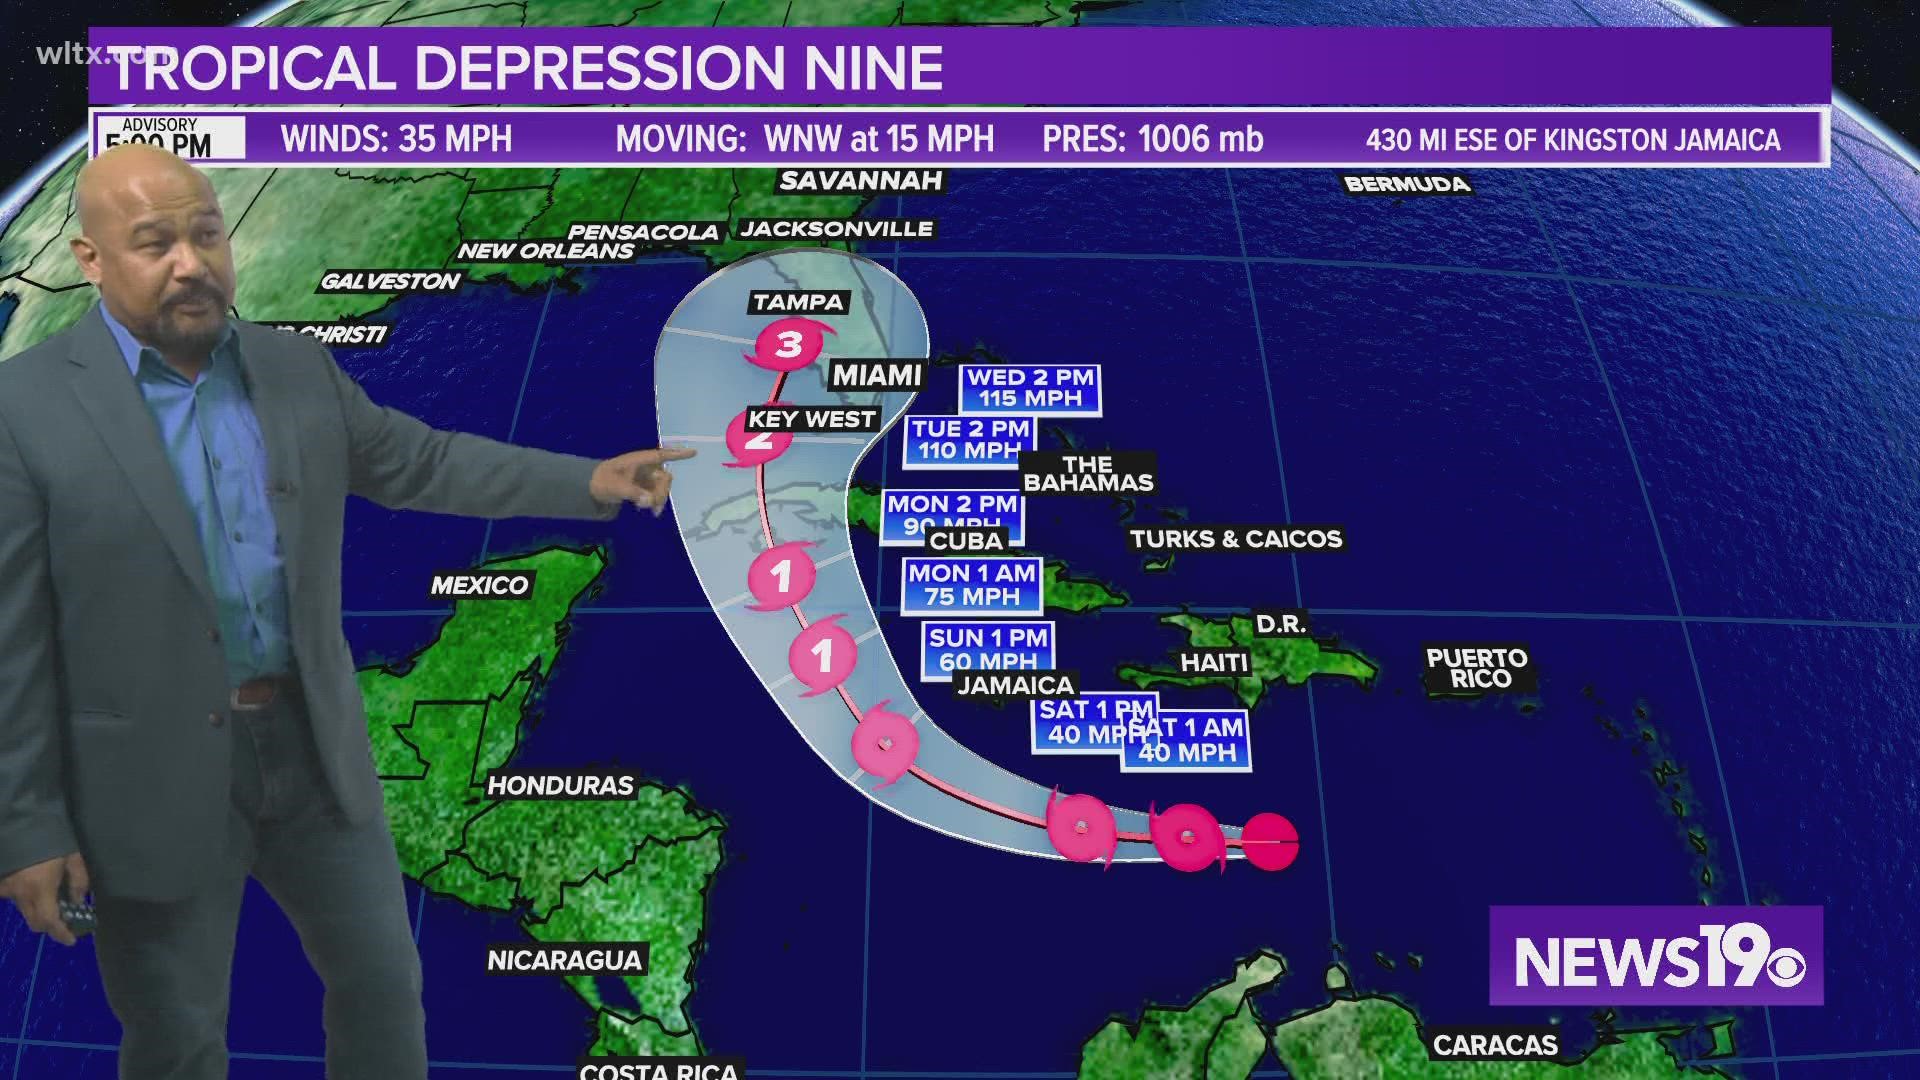 Tropical Depression continues to move west but is expected to turn northeast and strike Florida.